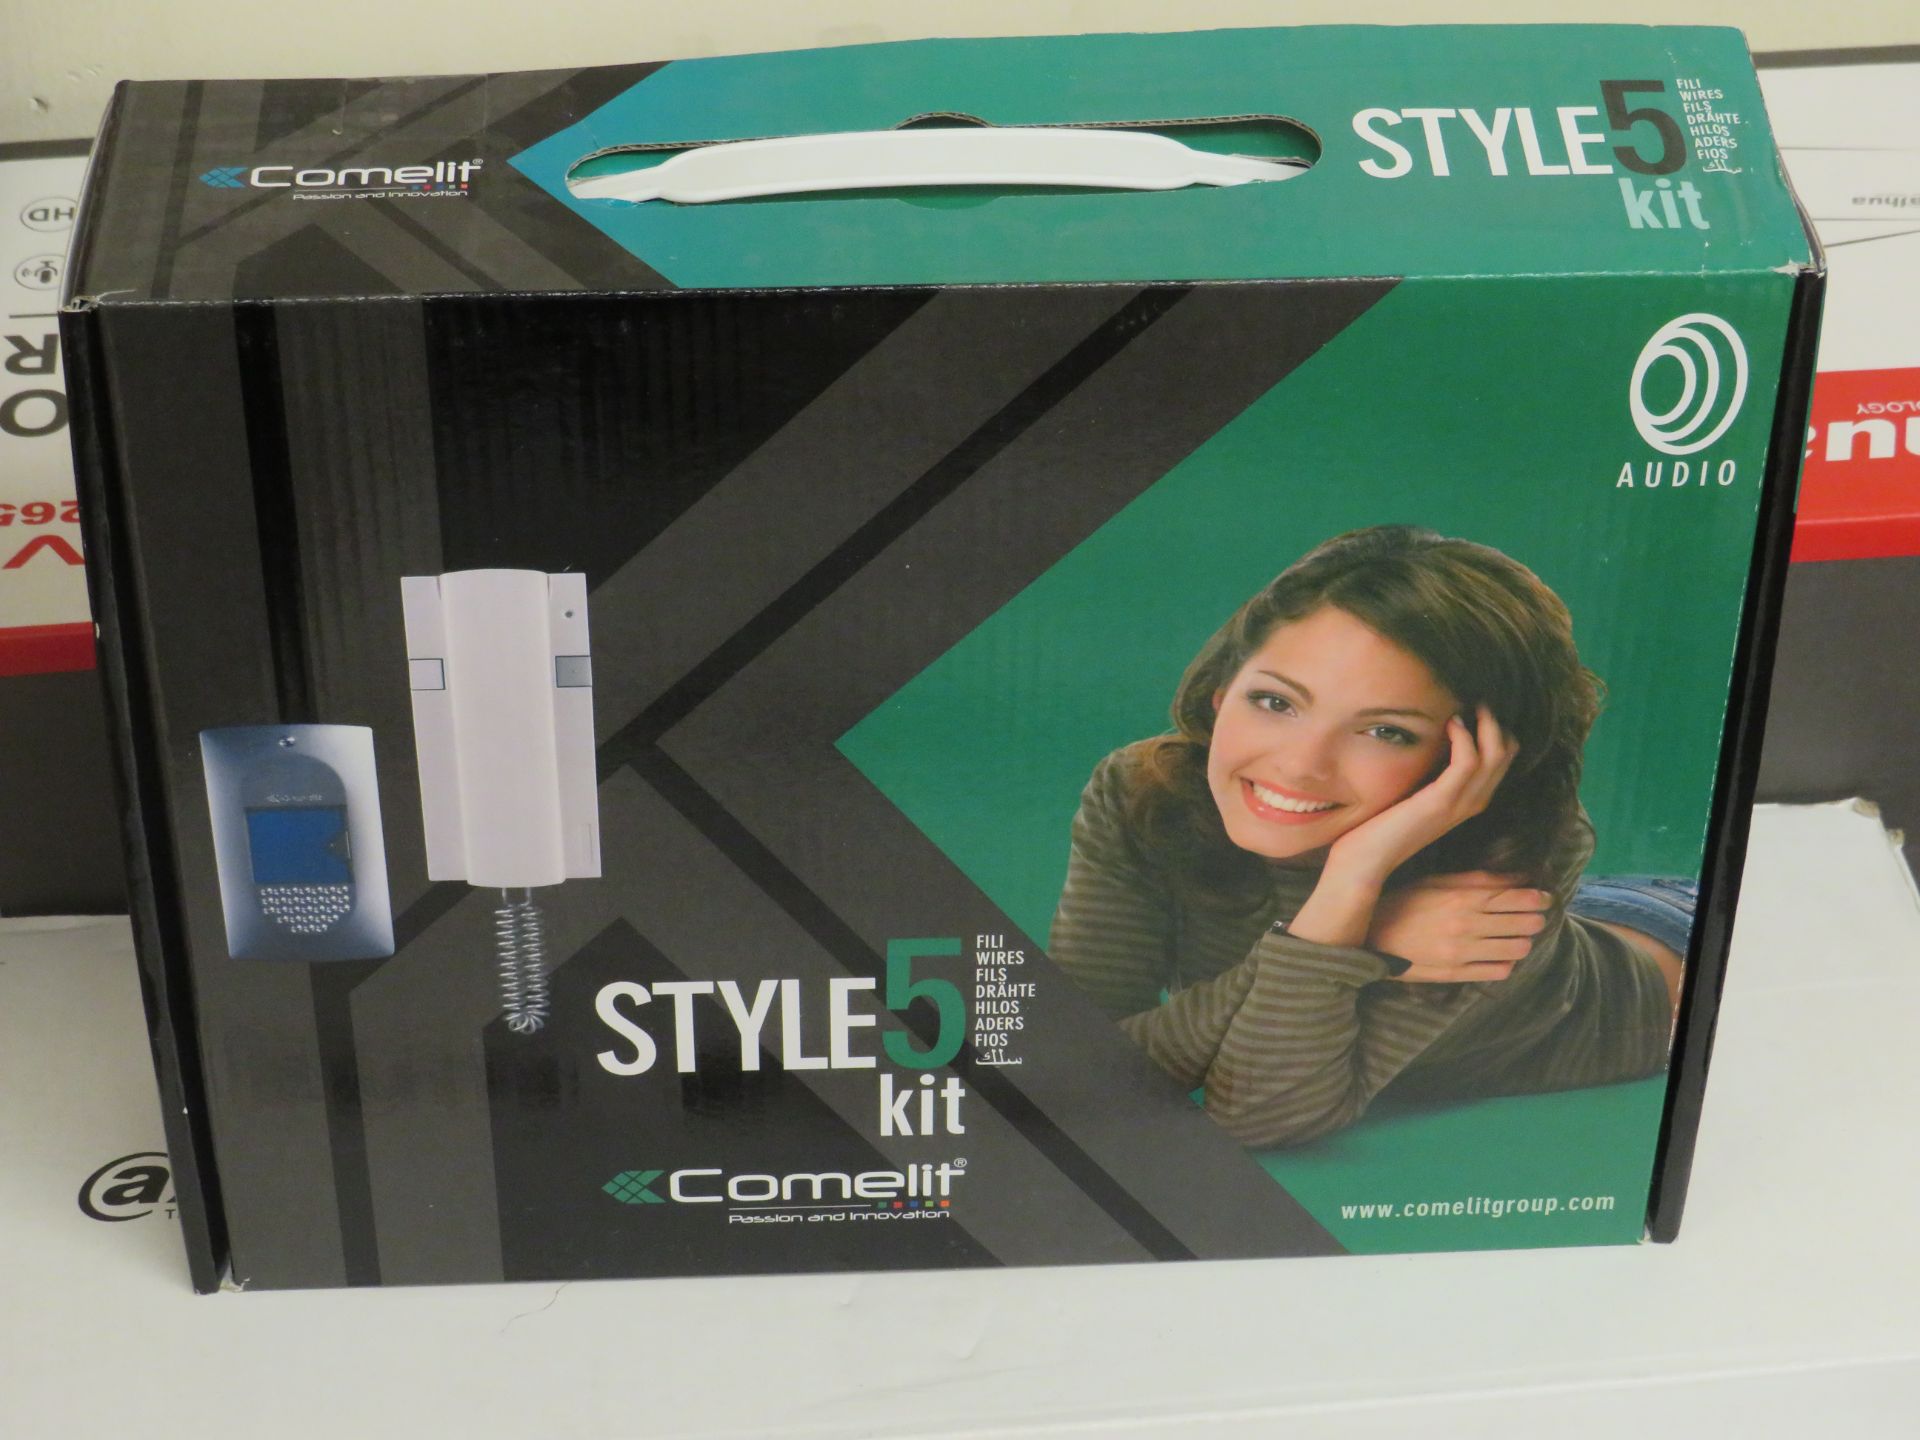 Comelit single family audio kit, unchecked and boxed.